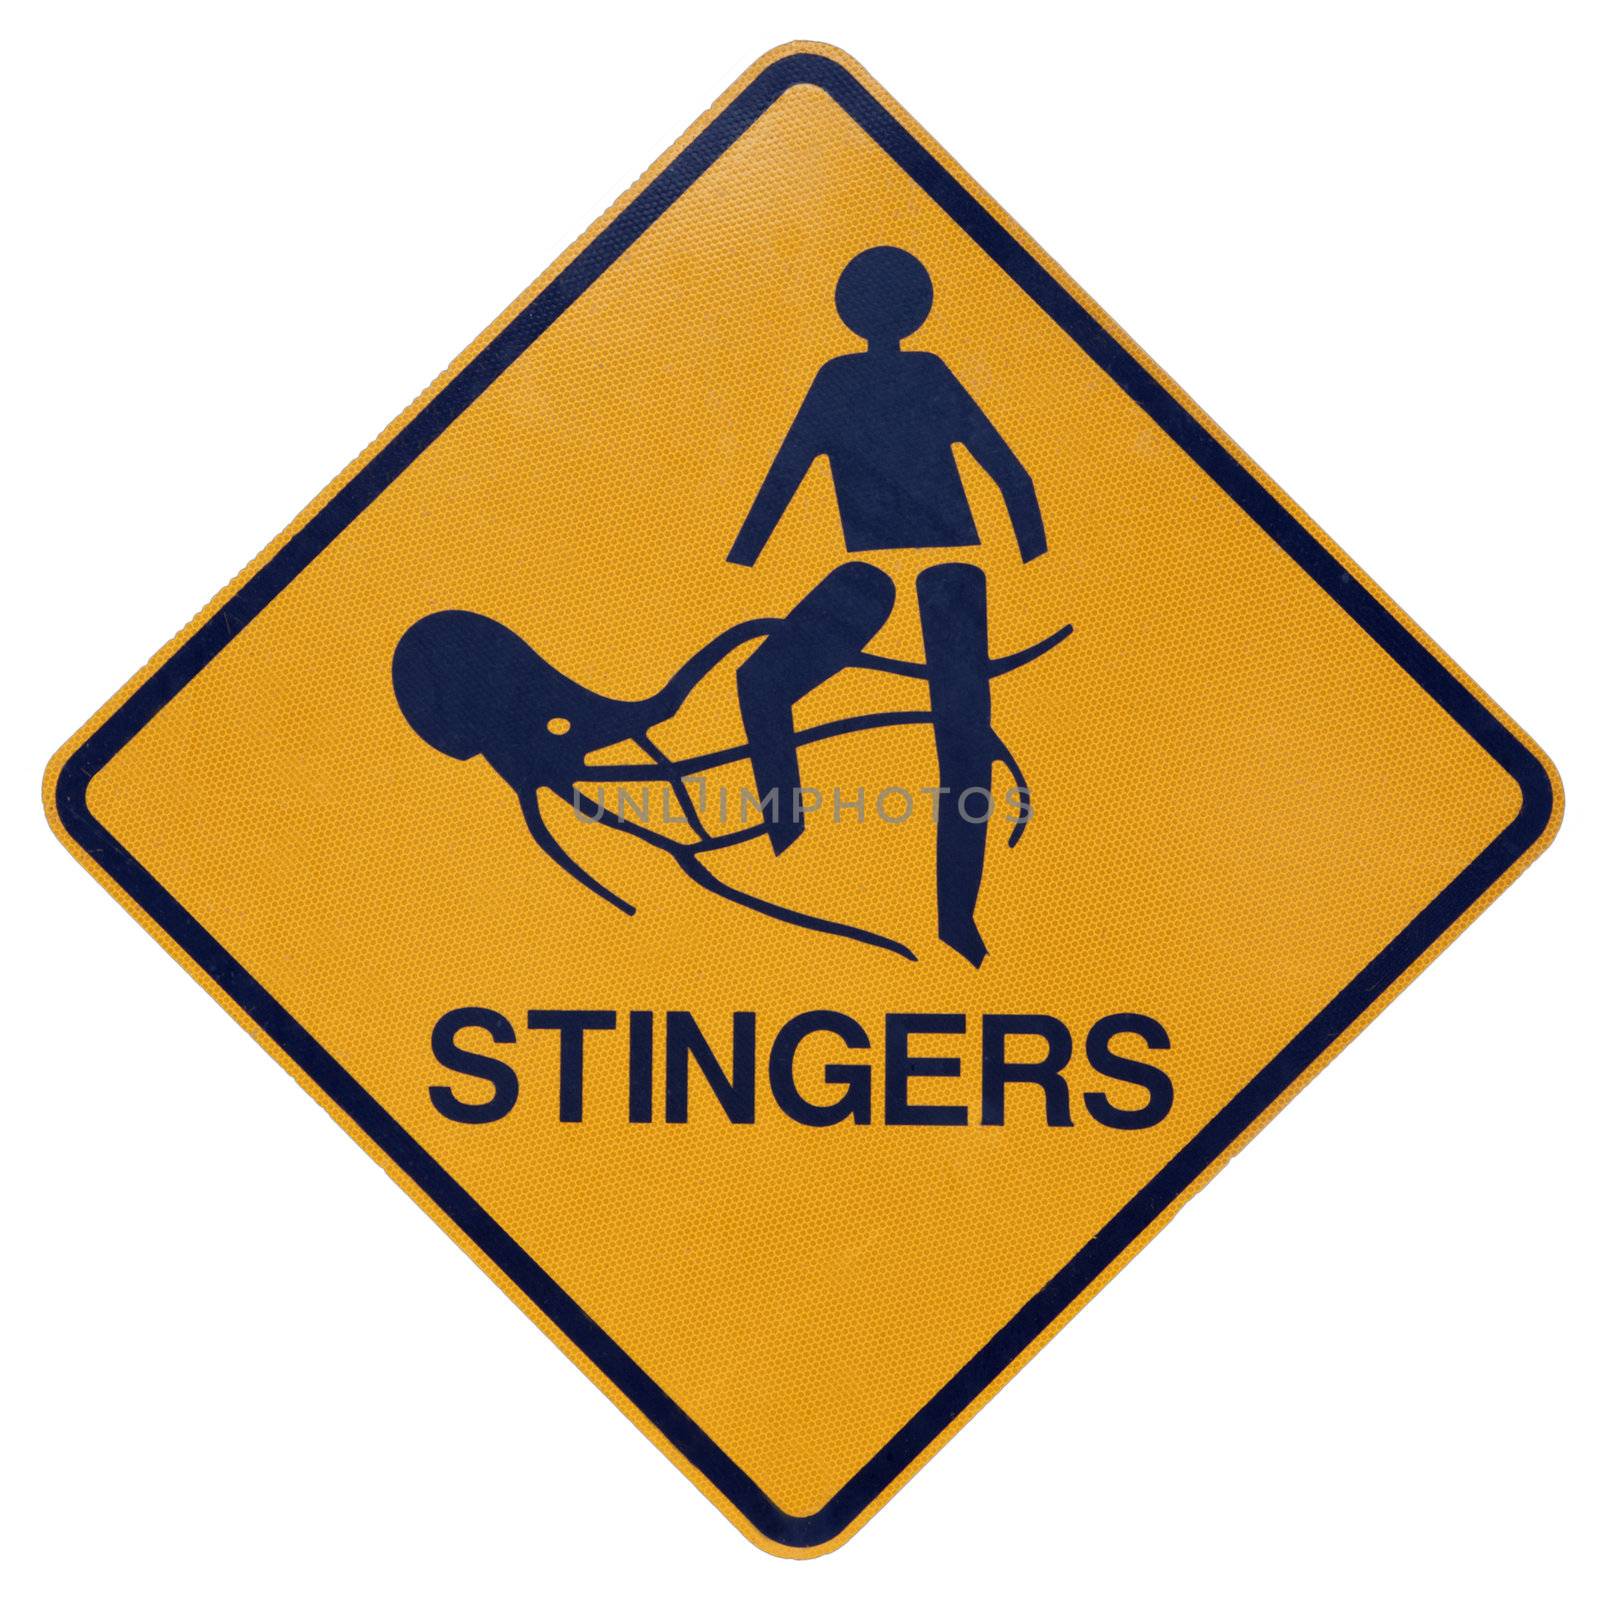 Marine stingers or jelly fish warning sign by Jaykayl